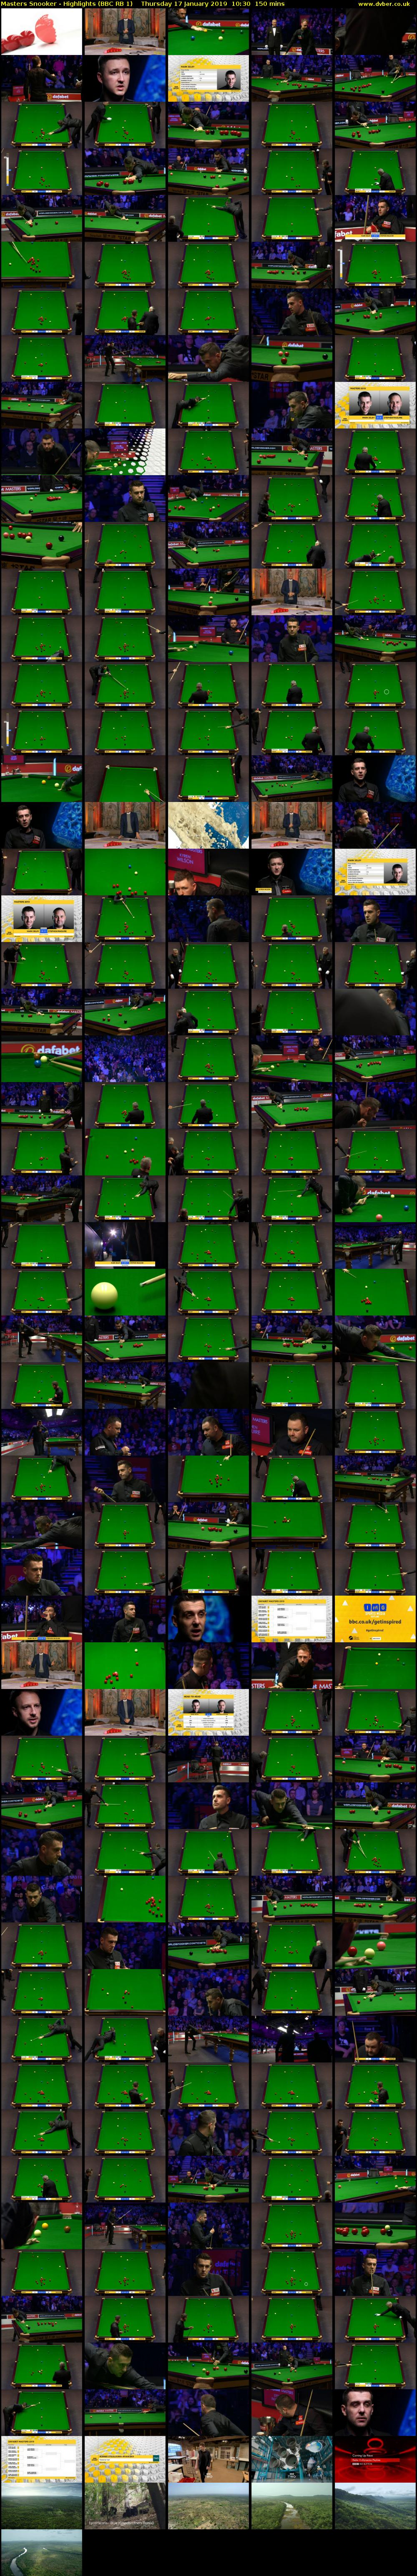 Masters Snooker - Highlights (BBC RB 1) Thursday 17 January 2019 10:30 - 13:00